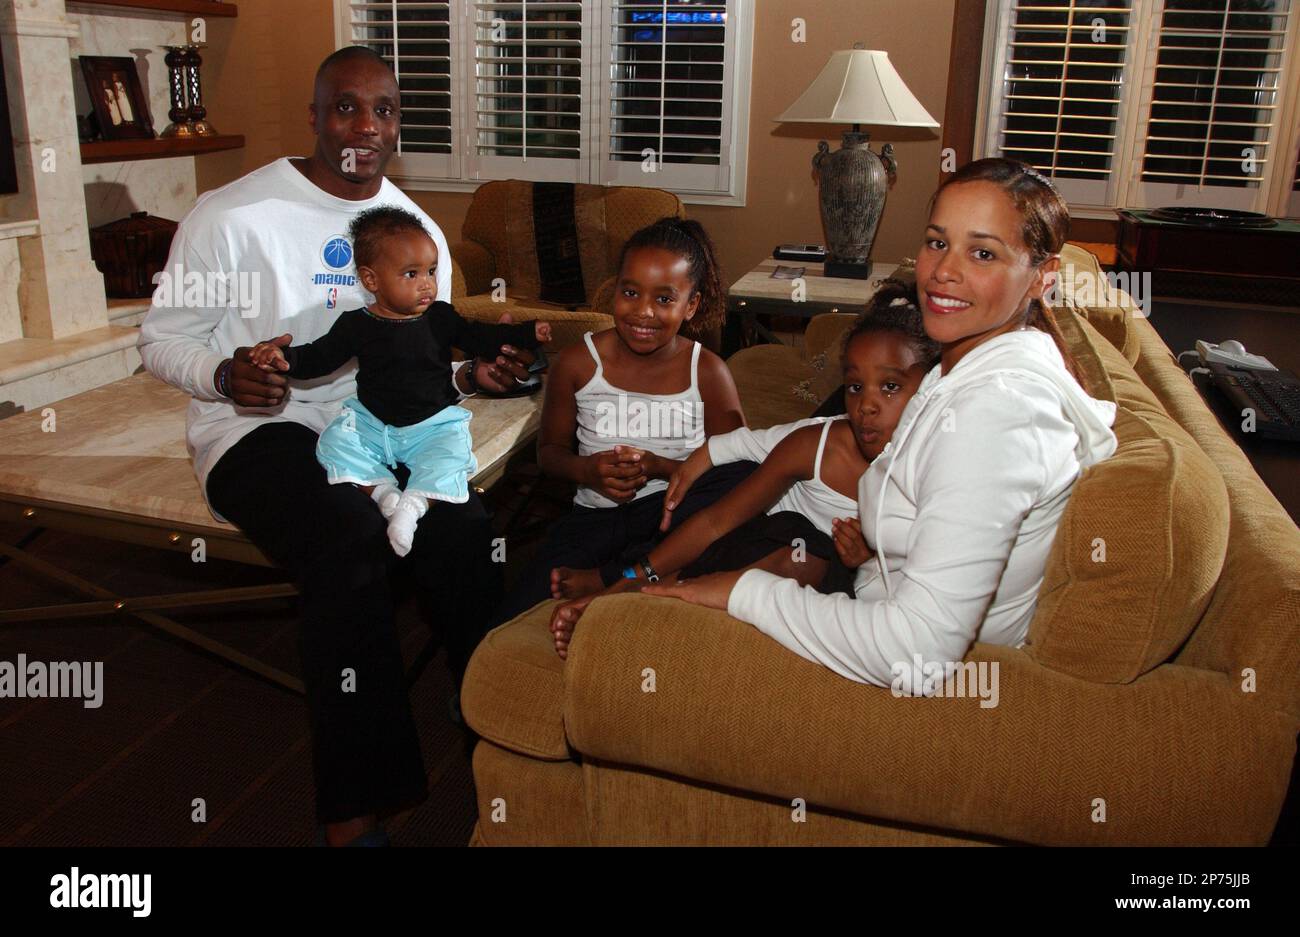 The Orlando Magic's Dee Brown, left, sits with his wife, Tammy, right, and  daughters Alanni, second from left, Alexis, center, and Alyssa, second from  right, in the entertainment room of their home